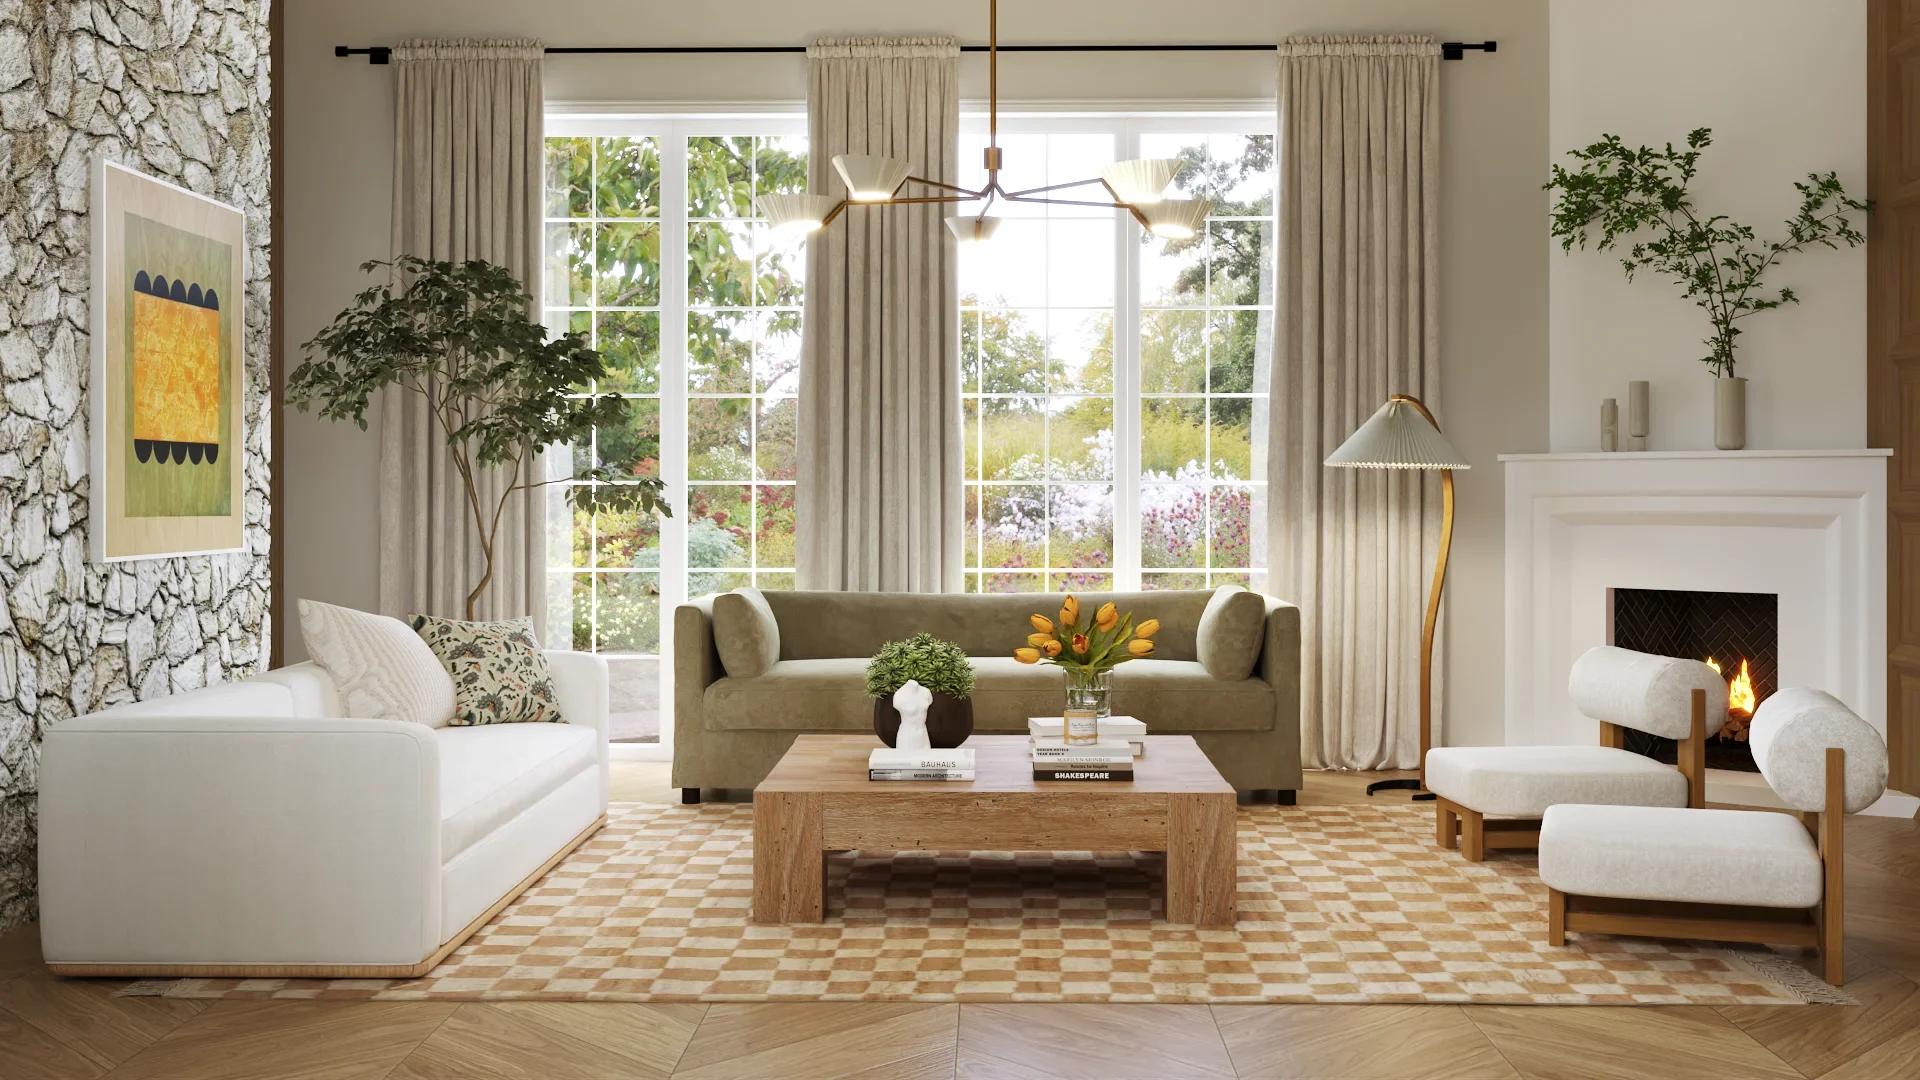 A stylish living room with a white sofa and DWR - by Mads Caprani, Timberline Floor Lamp, green velvet couch, wooden coffee table with tulips and books, large windows with beige curtains, a checkered rug, a stone accent wall with abstract art, a fireplace with cozy chairs, and greenery, creating a bright and inviting space.